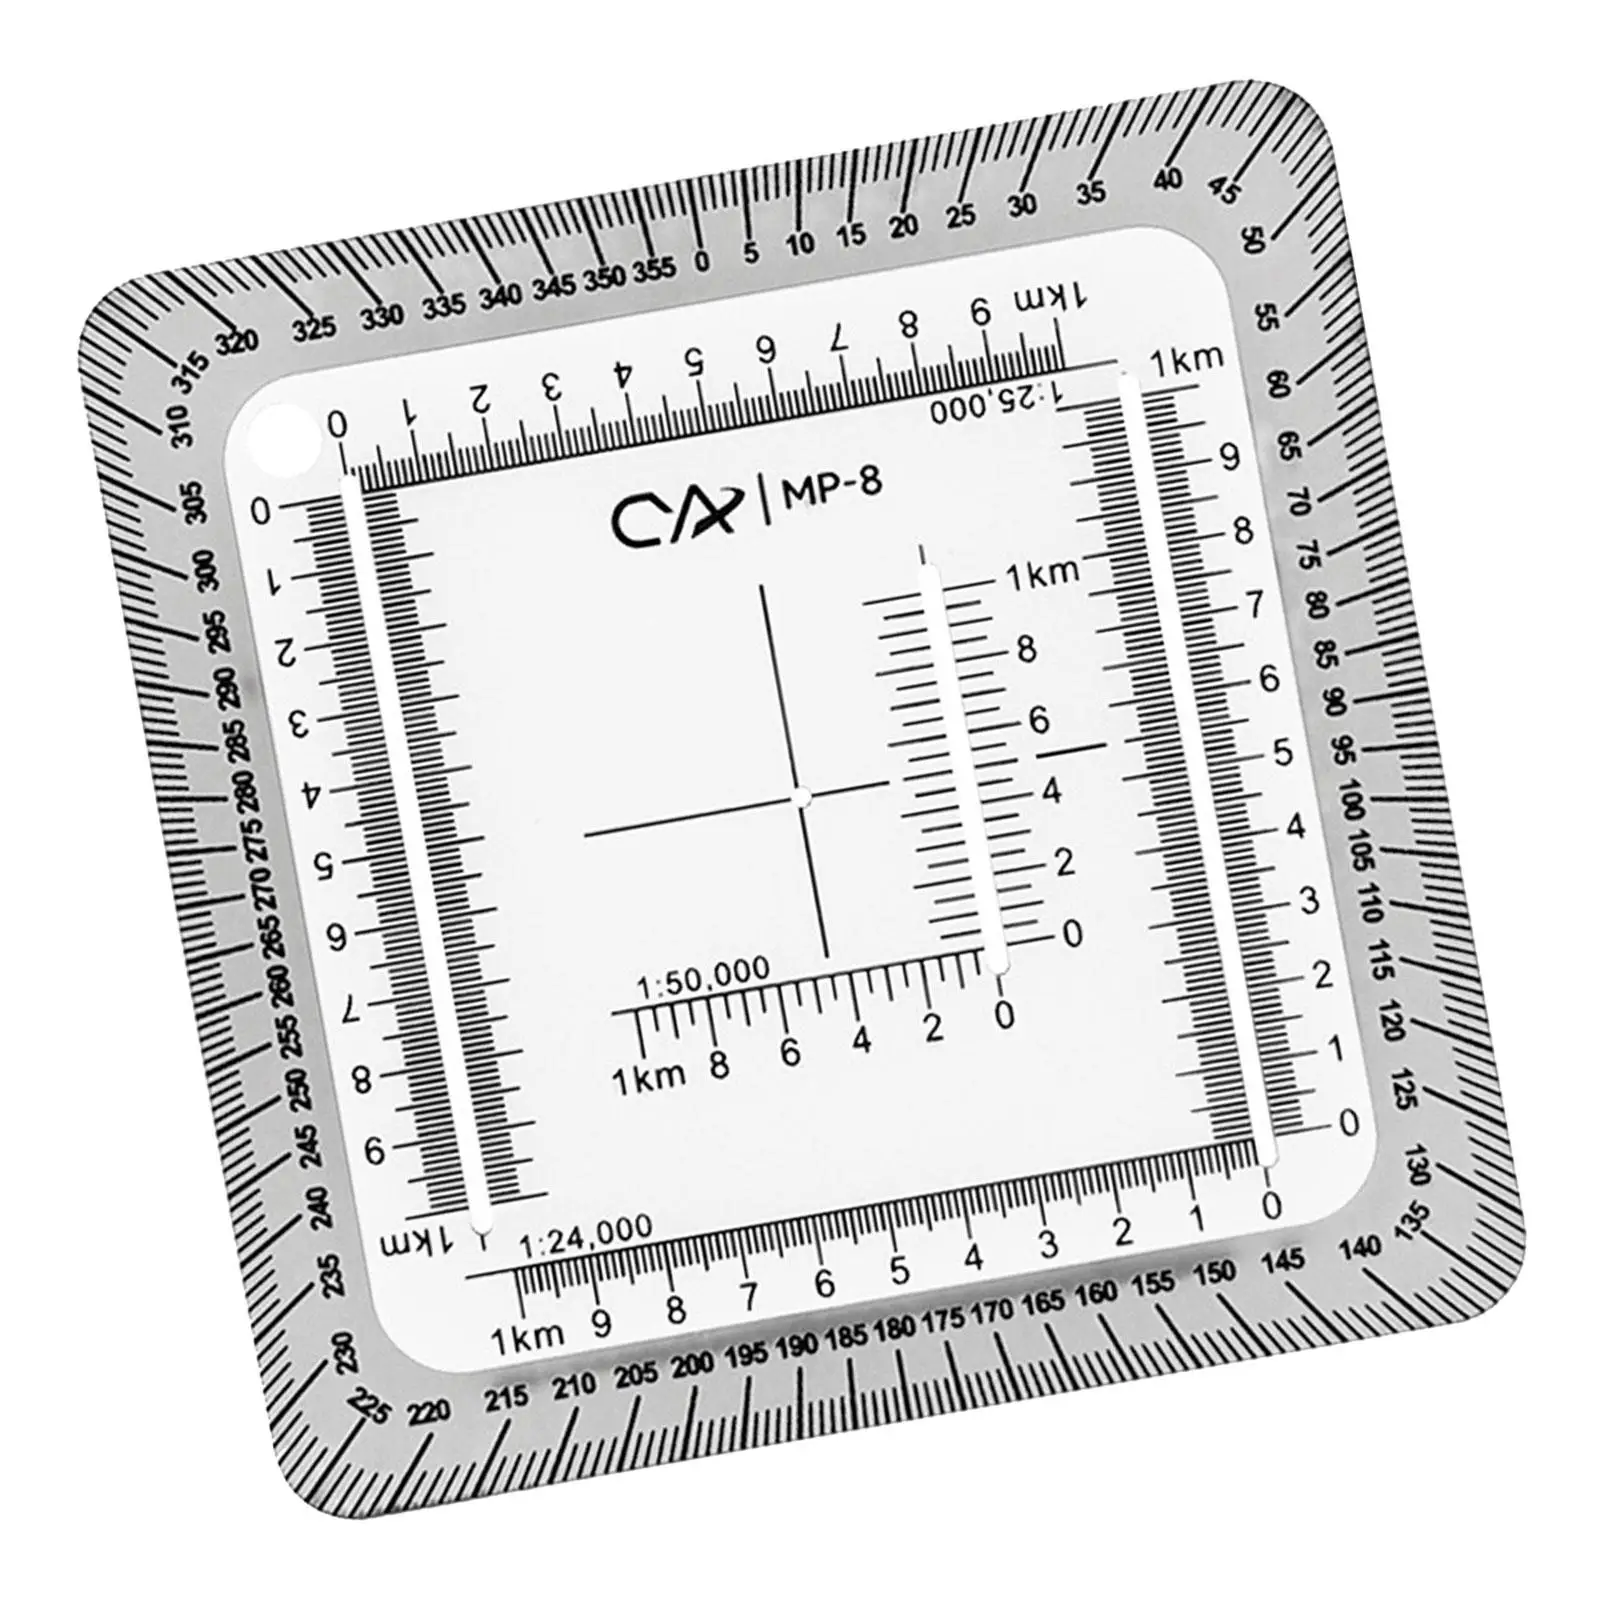 Utm Slot Tool Acrylic Map Reading Degrees Clear Professional Protractor Maptool for Poltting Utm, Usng, Mgrs Coordinates Outdoor